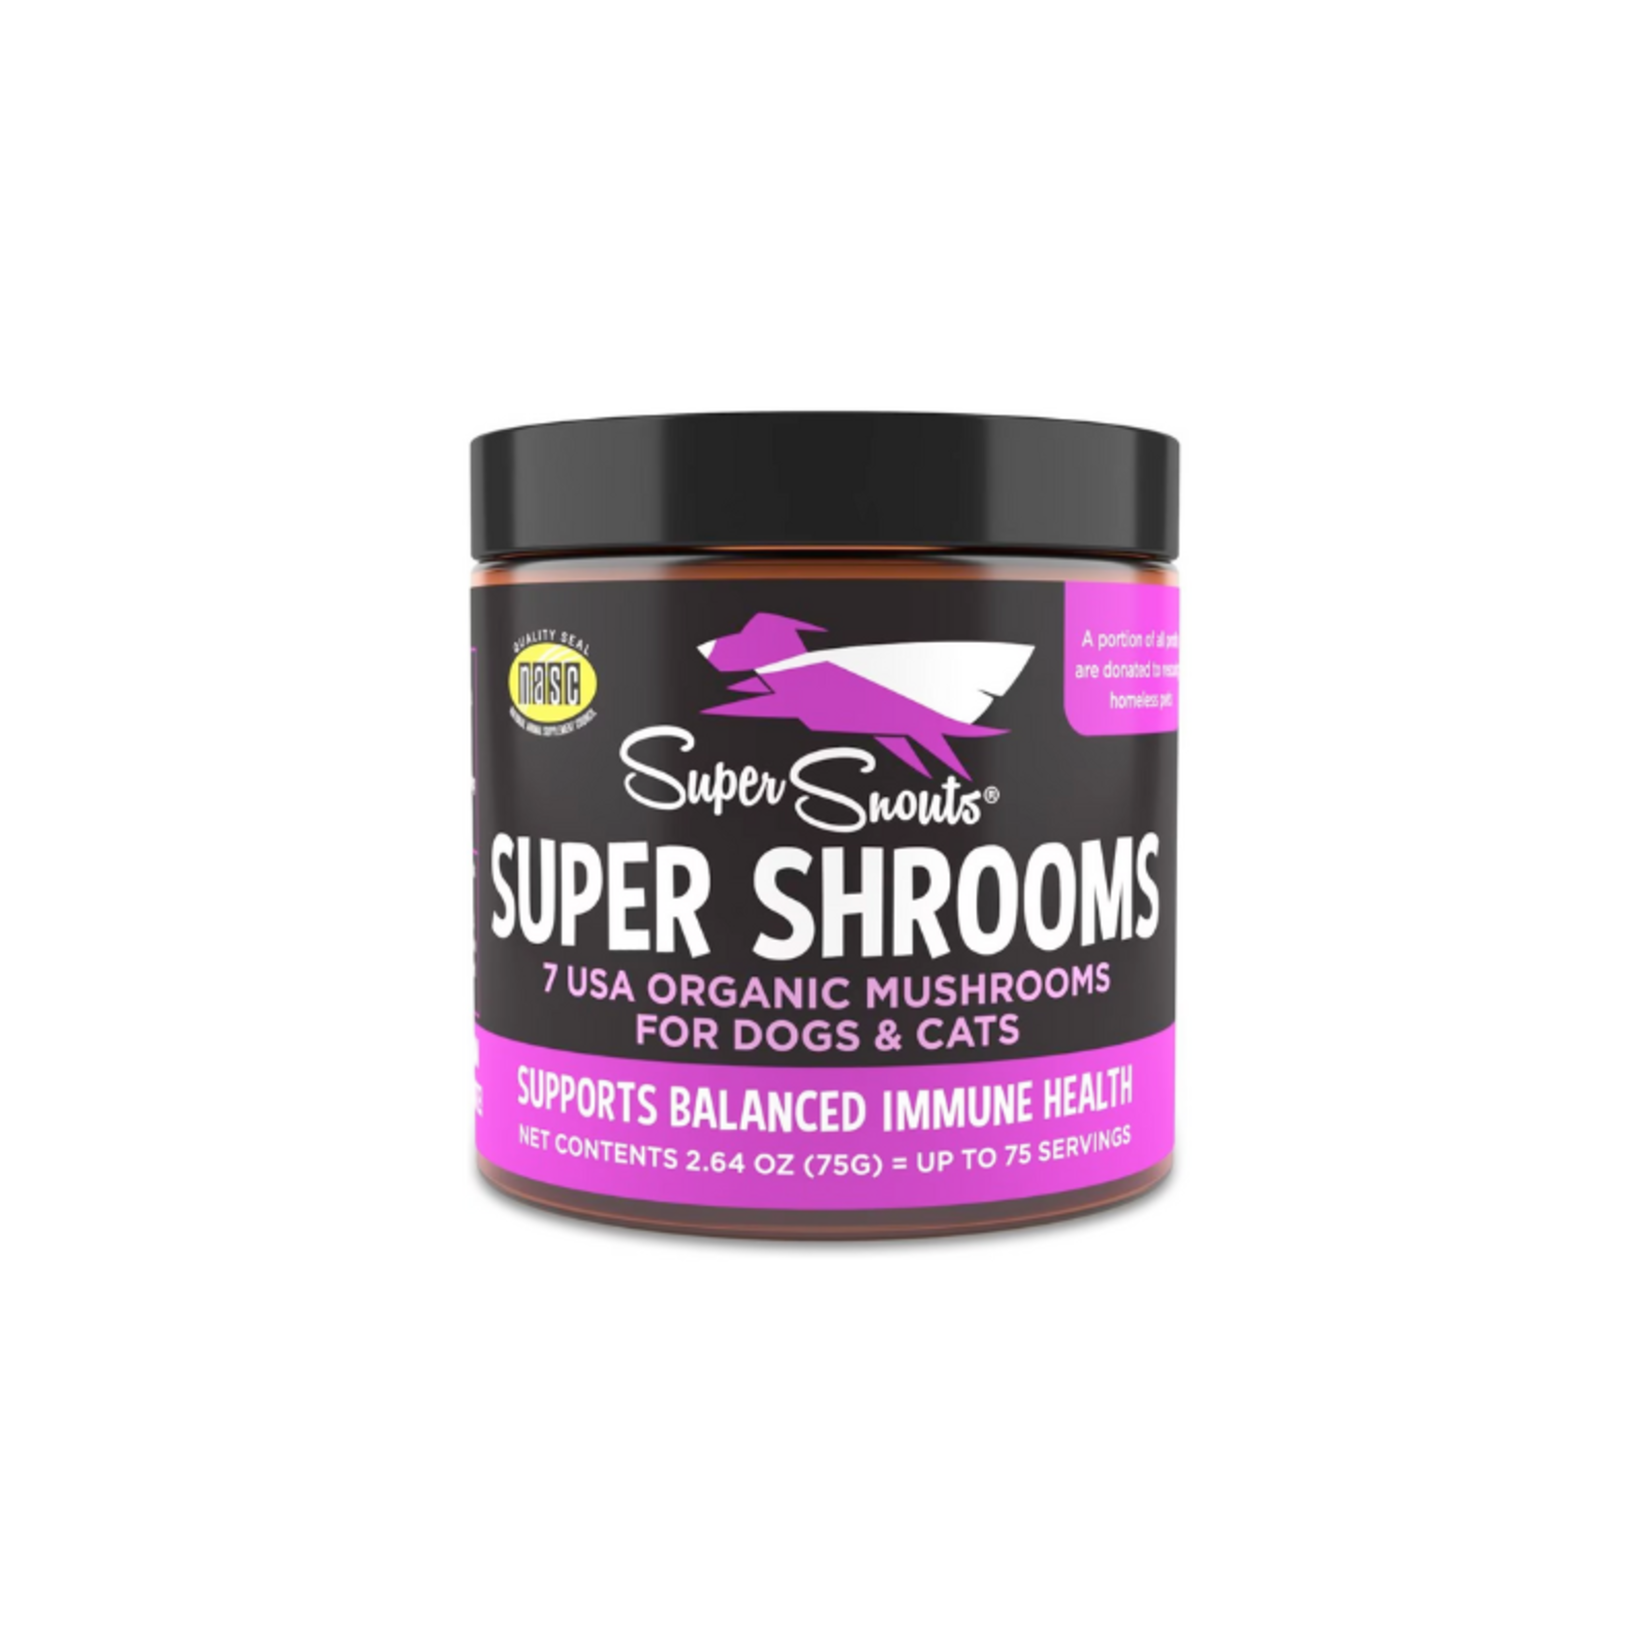 Diggin' Your Dog 2.64 oz. - Super Shrooms - Immune Support for Dogs & Cats - Super Snouts